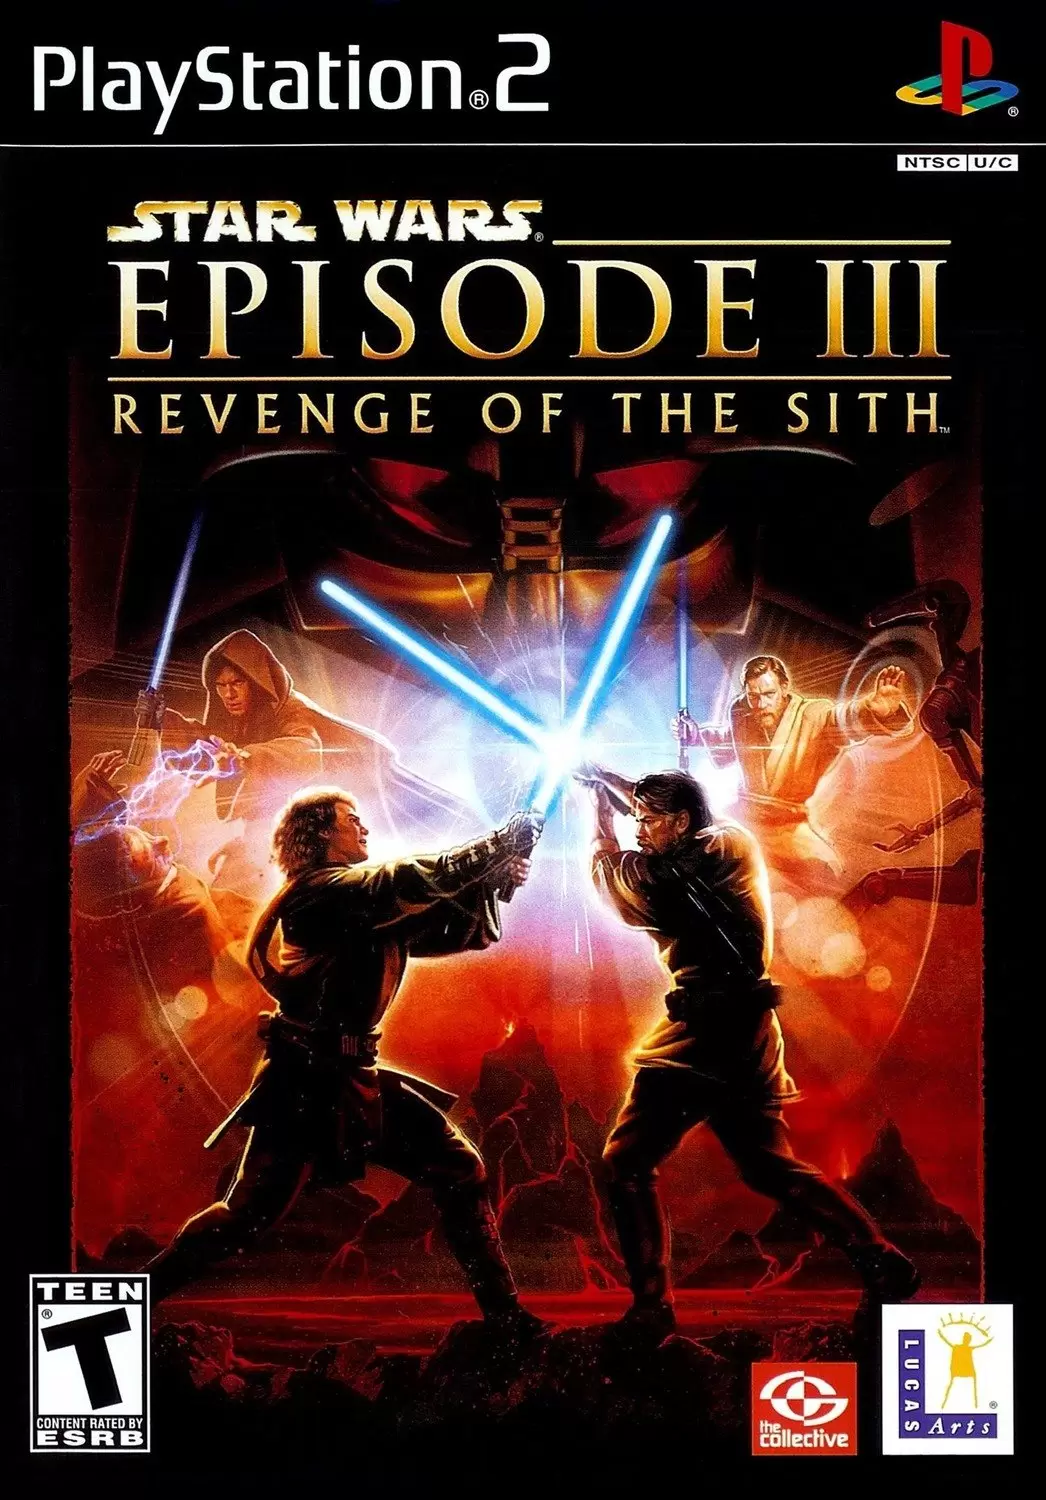 PS2 Games - Star Wars: Episode III - Revenge of the Sith